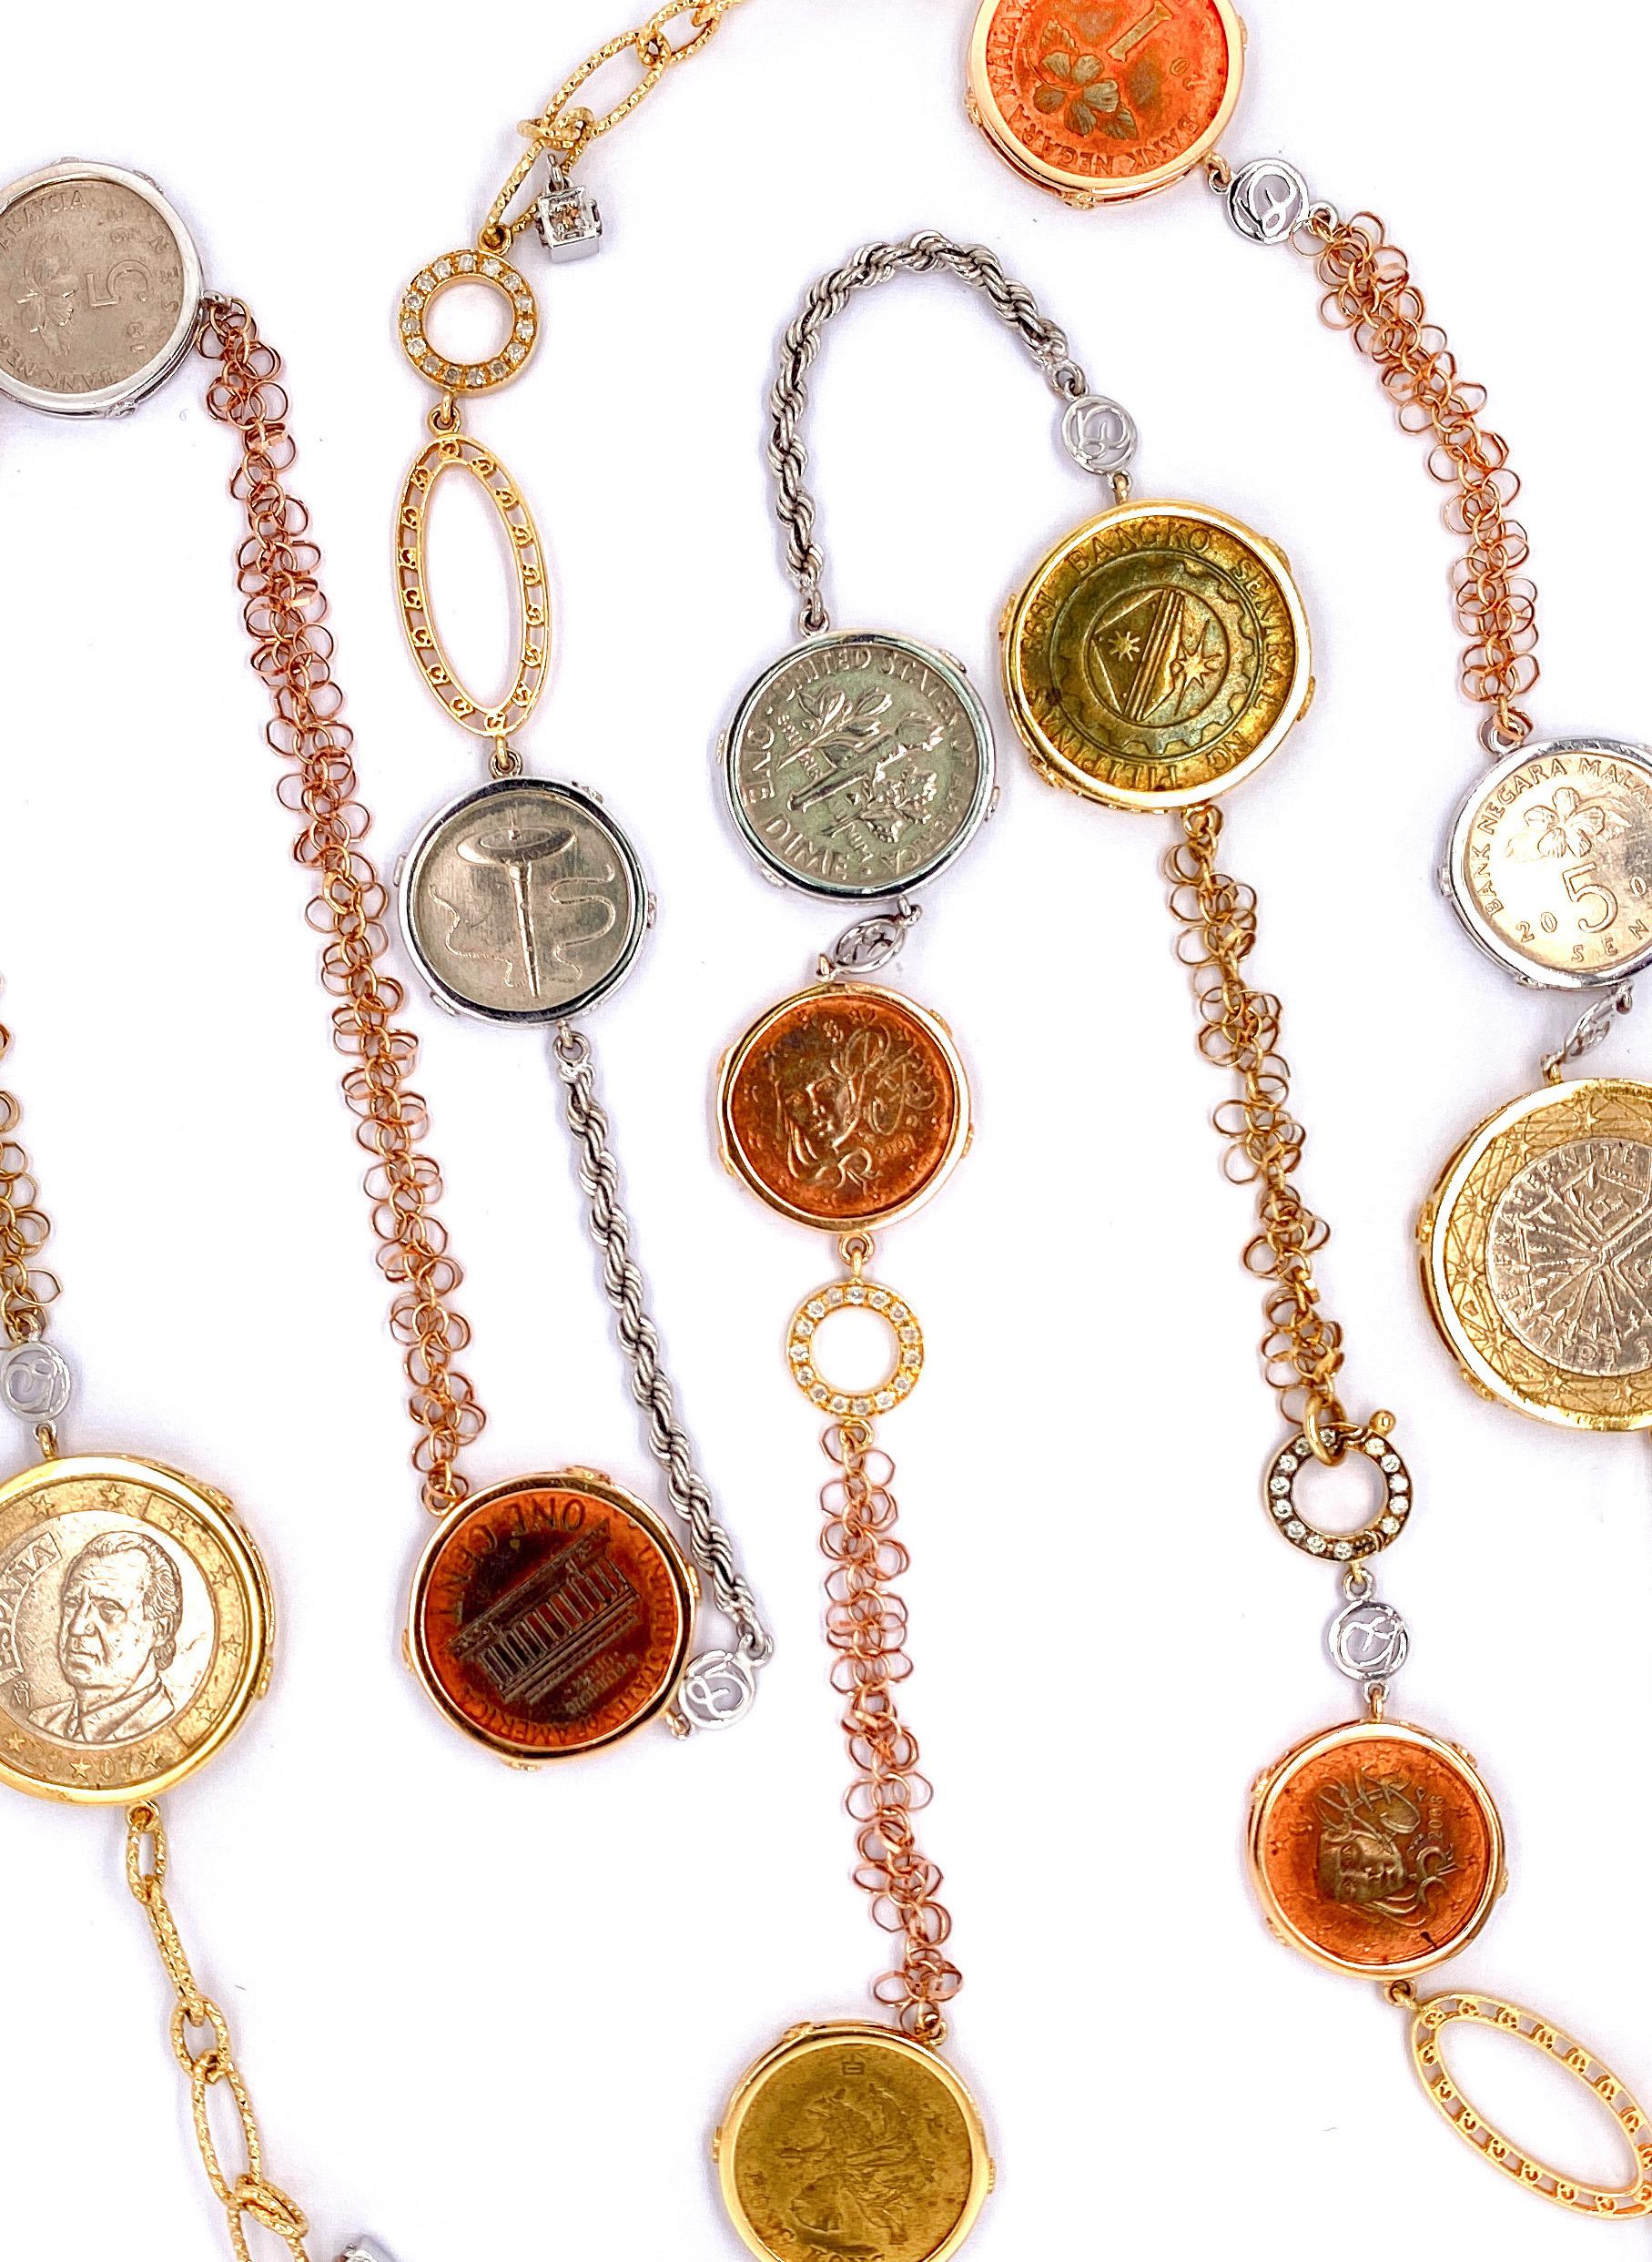 Designed by Hong Kong’s renowned yet private fine jewelry designer, Dilys Young, this 18 karat rose, yellow and white gold necklace carries the stories and cultures of many different cities with the coins collected from Hong Kong and her travels